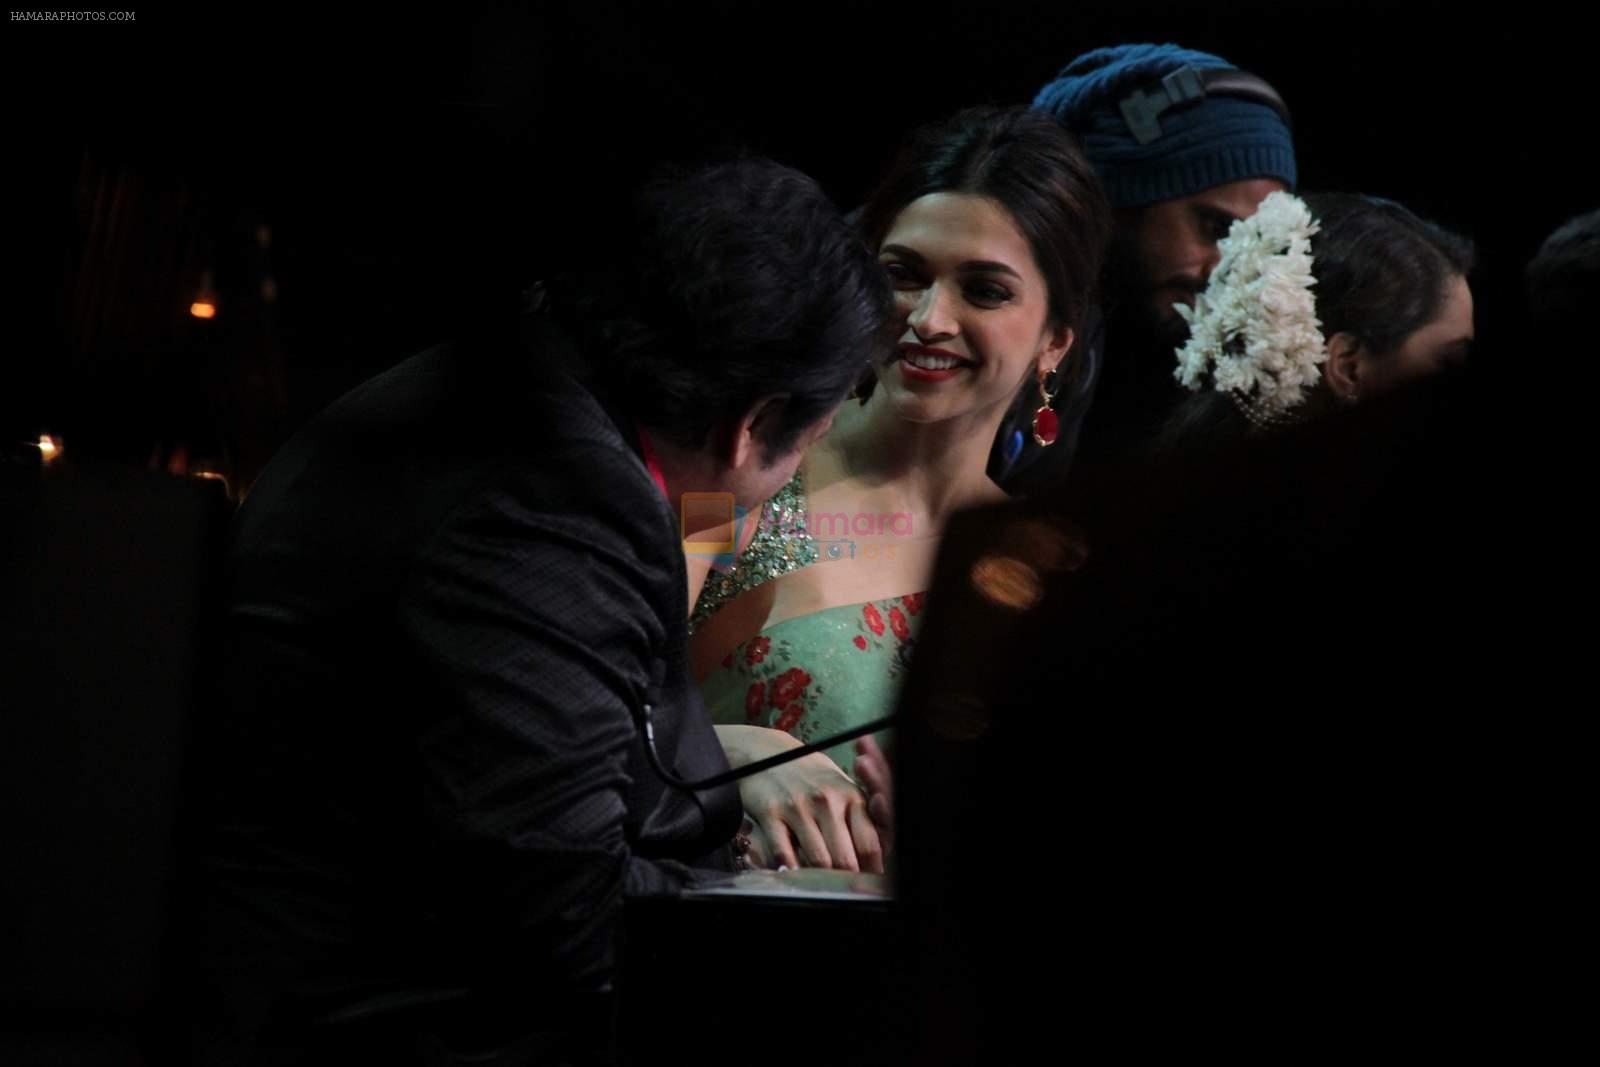 Deepika Padukone on the sets of DID Super Moms in Famous on 12th May 2015